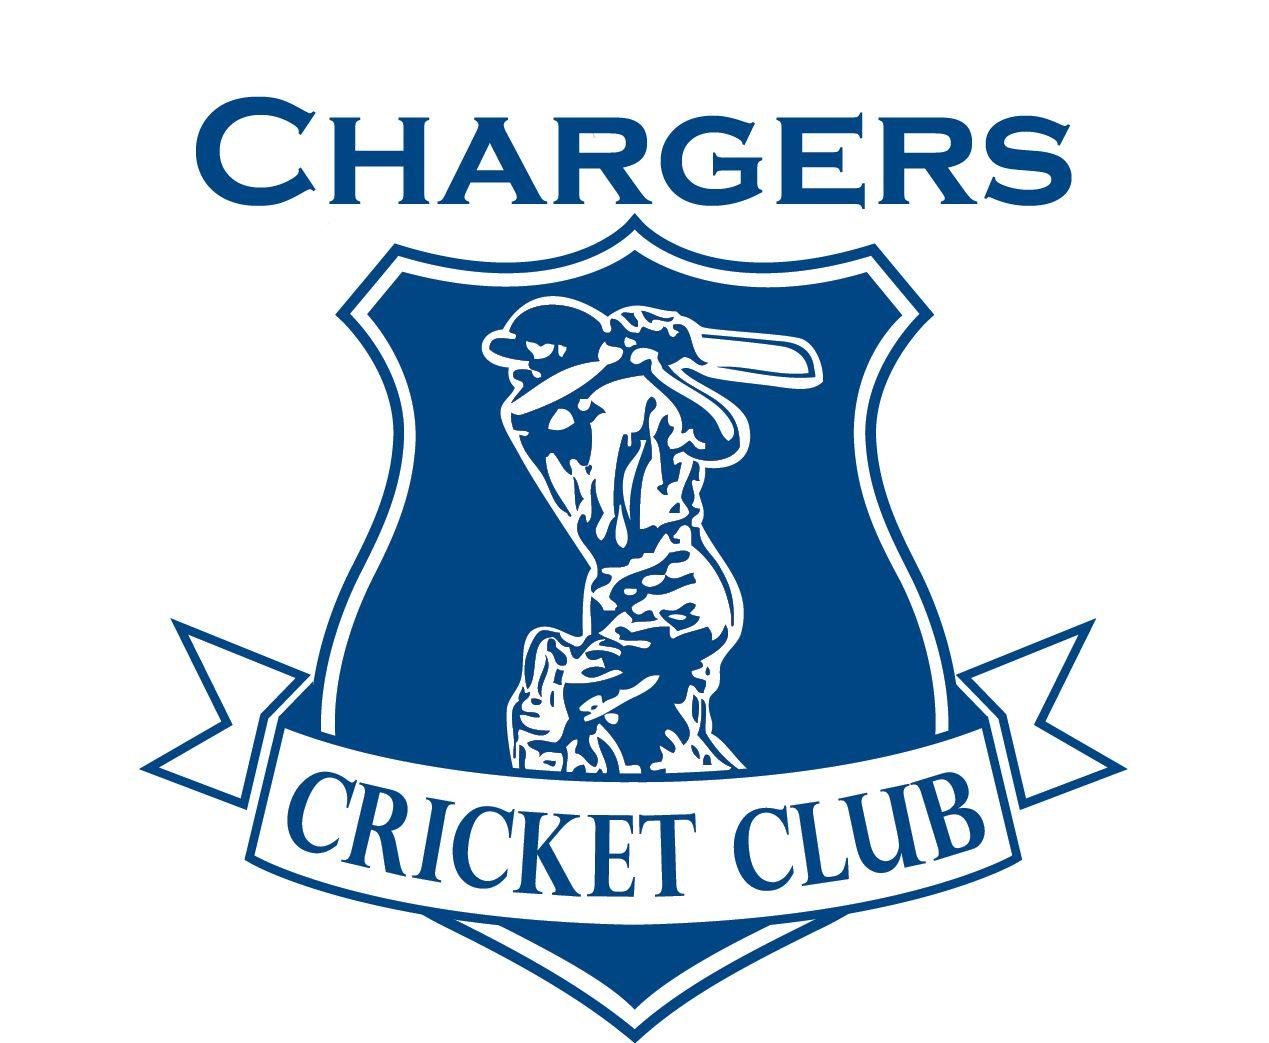 Cricket Club Logo - Chargers Cricket Club | Welcome to my website